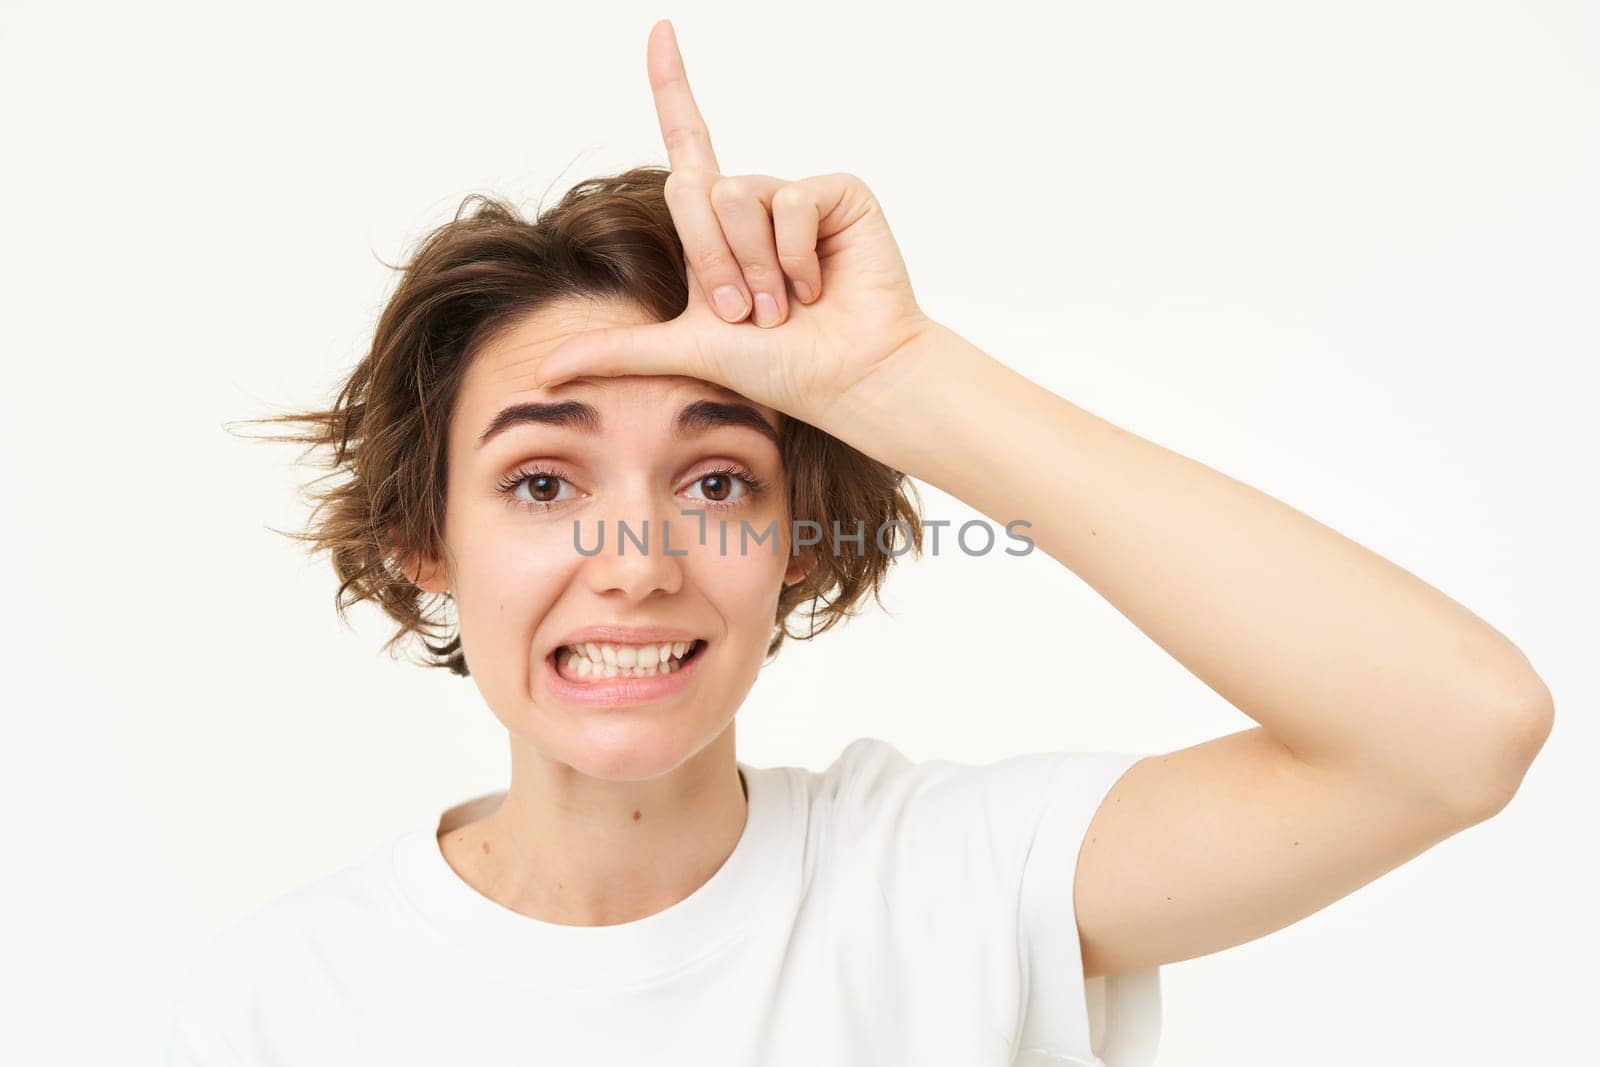 Close up of young woman making fun of friend, smiling and showing loser gesture, l letter on forehead, standing over white background.